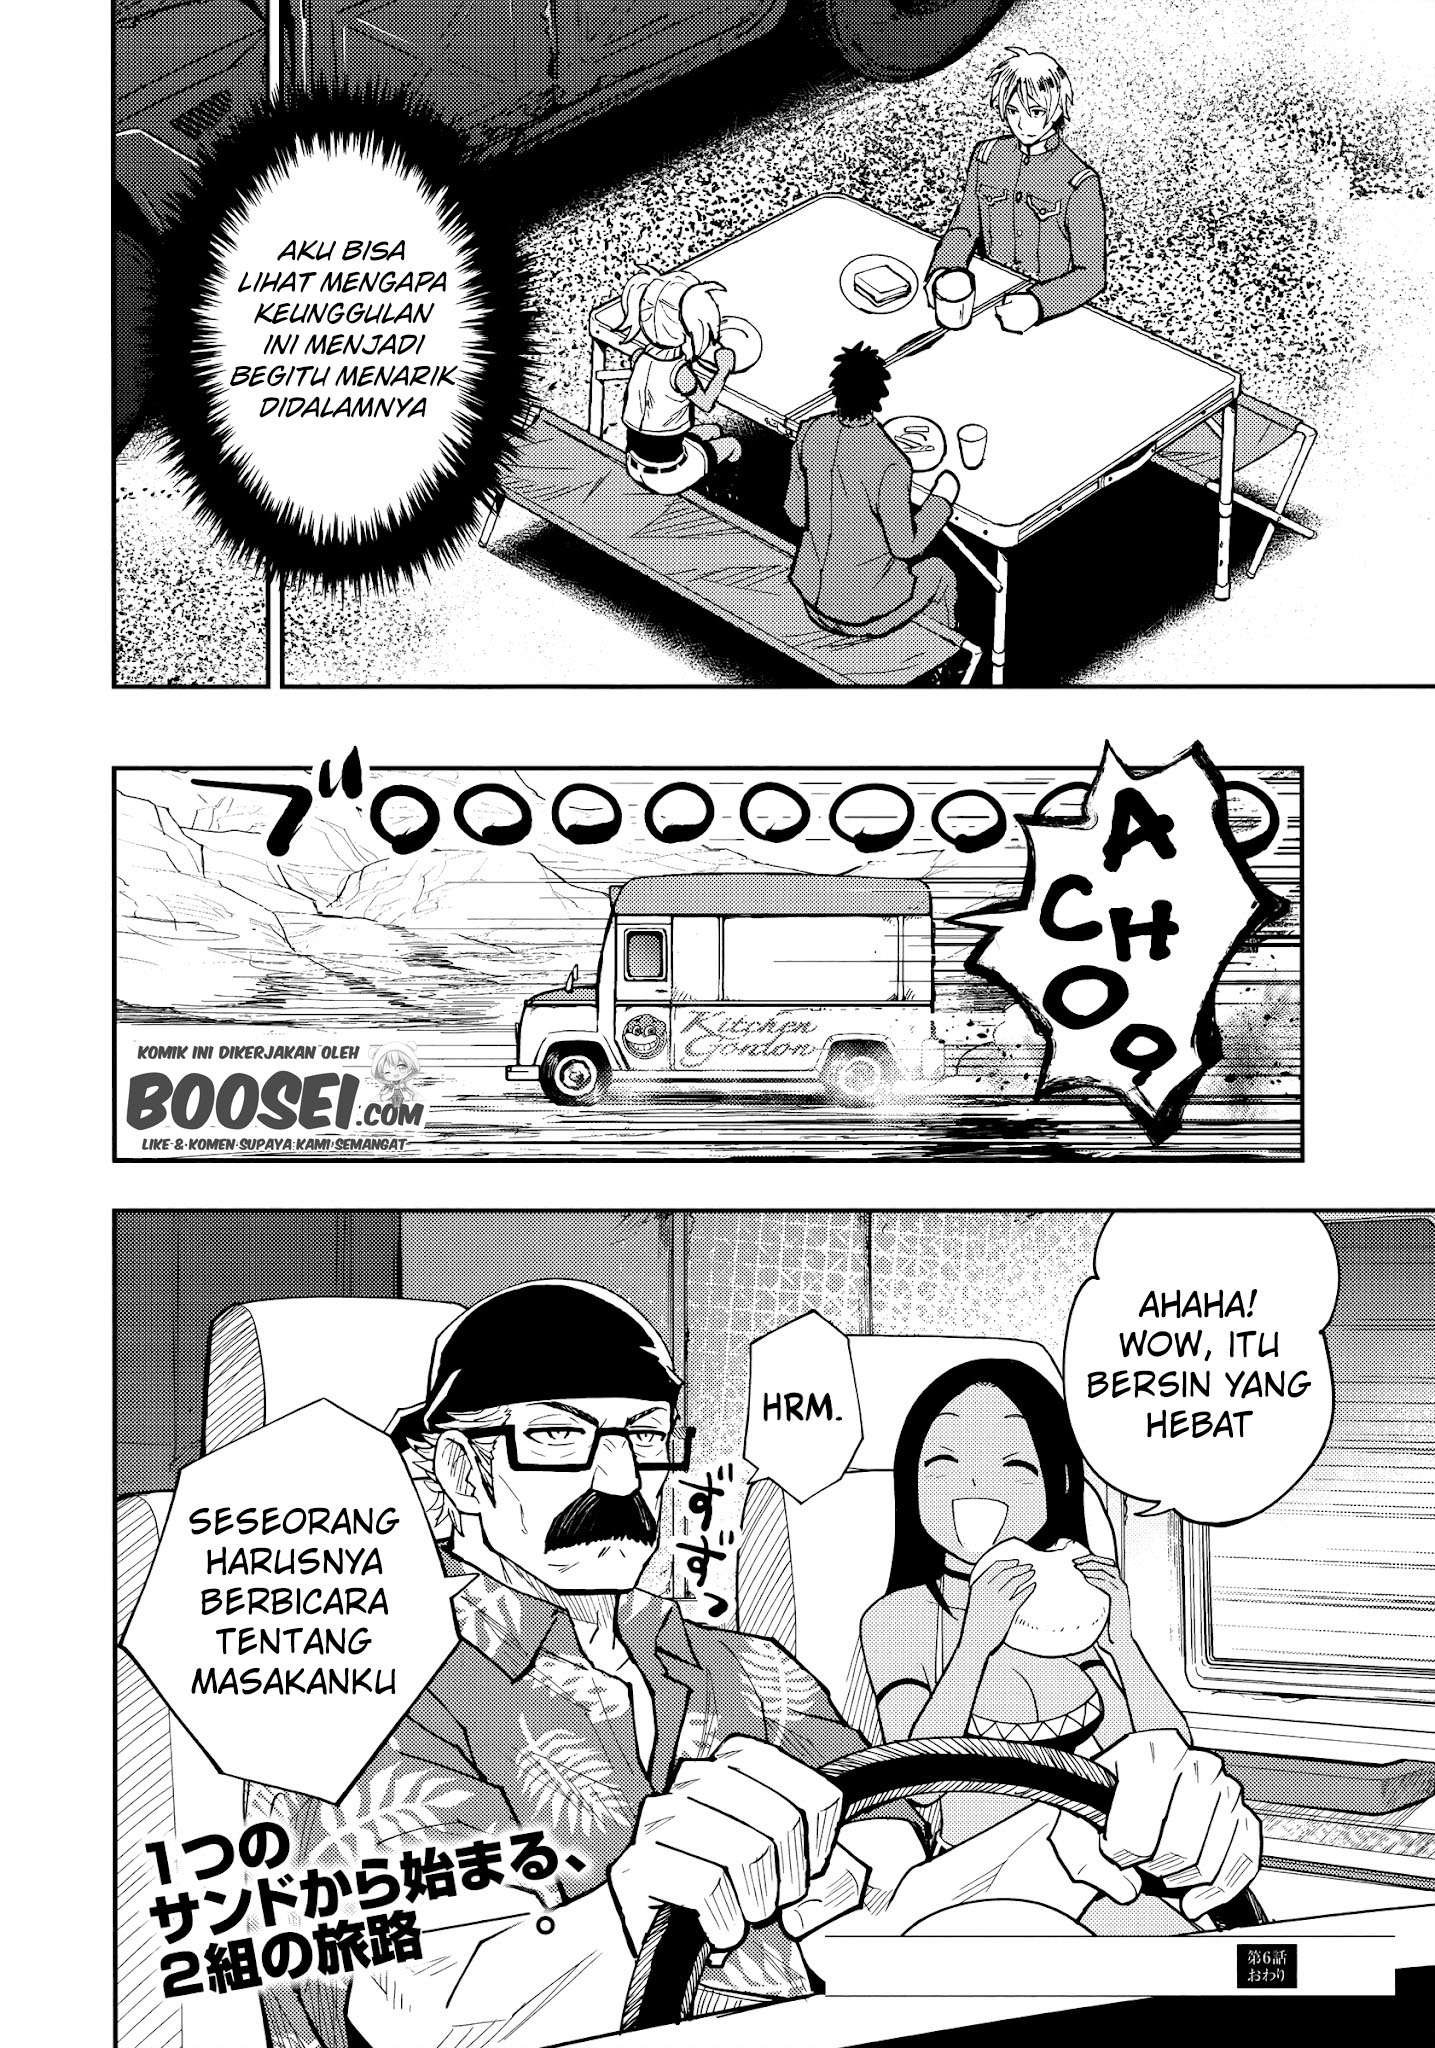 Crazy Food Truck Chapter 06